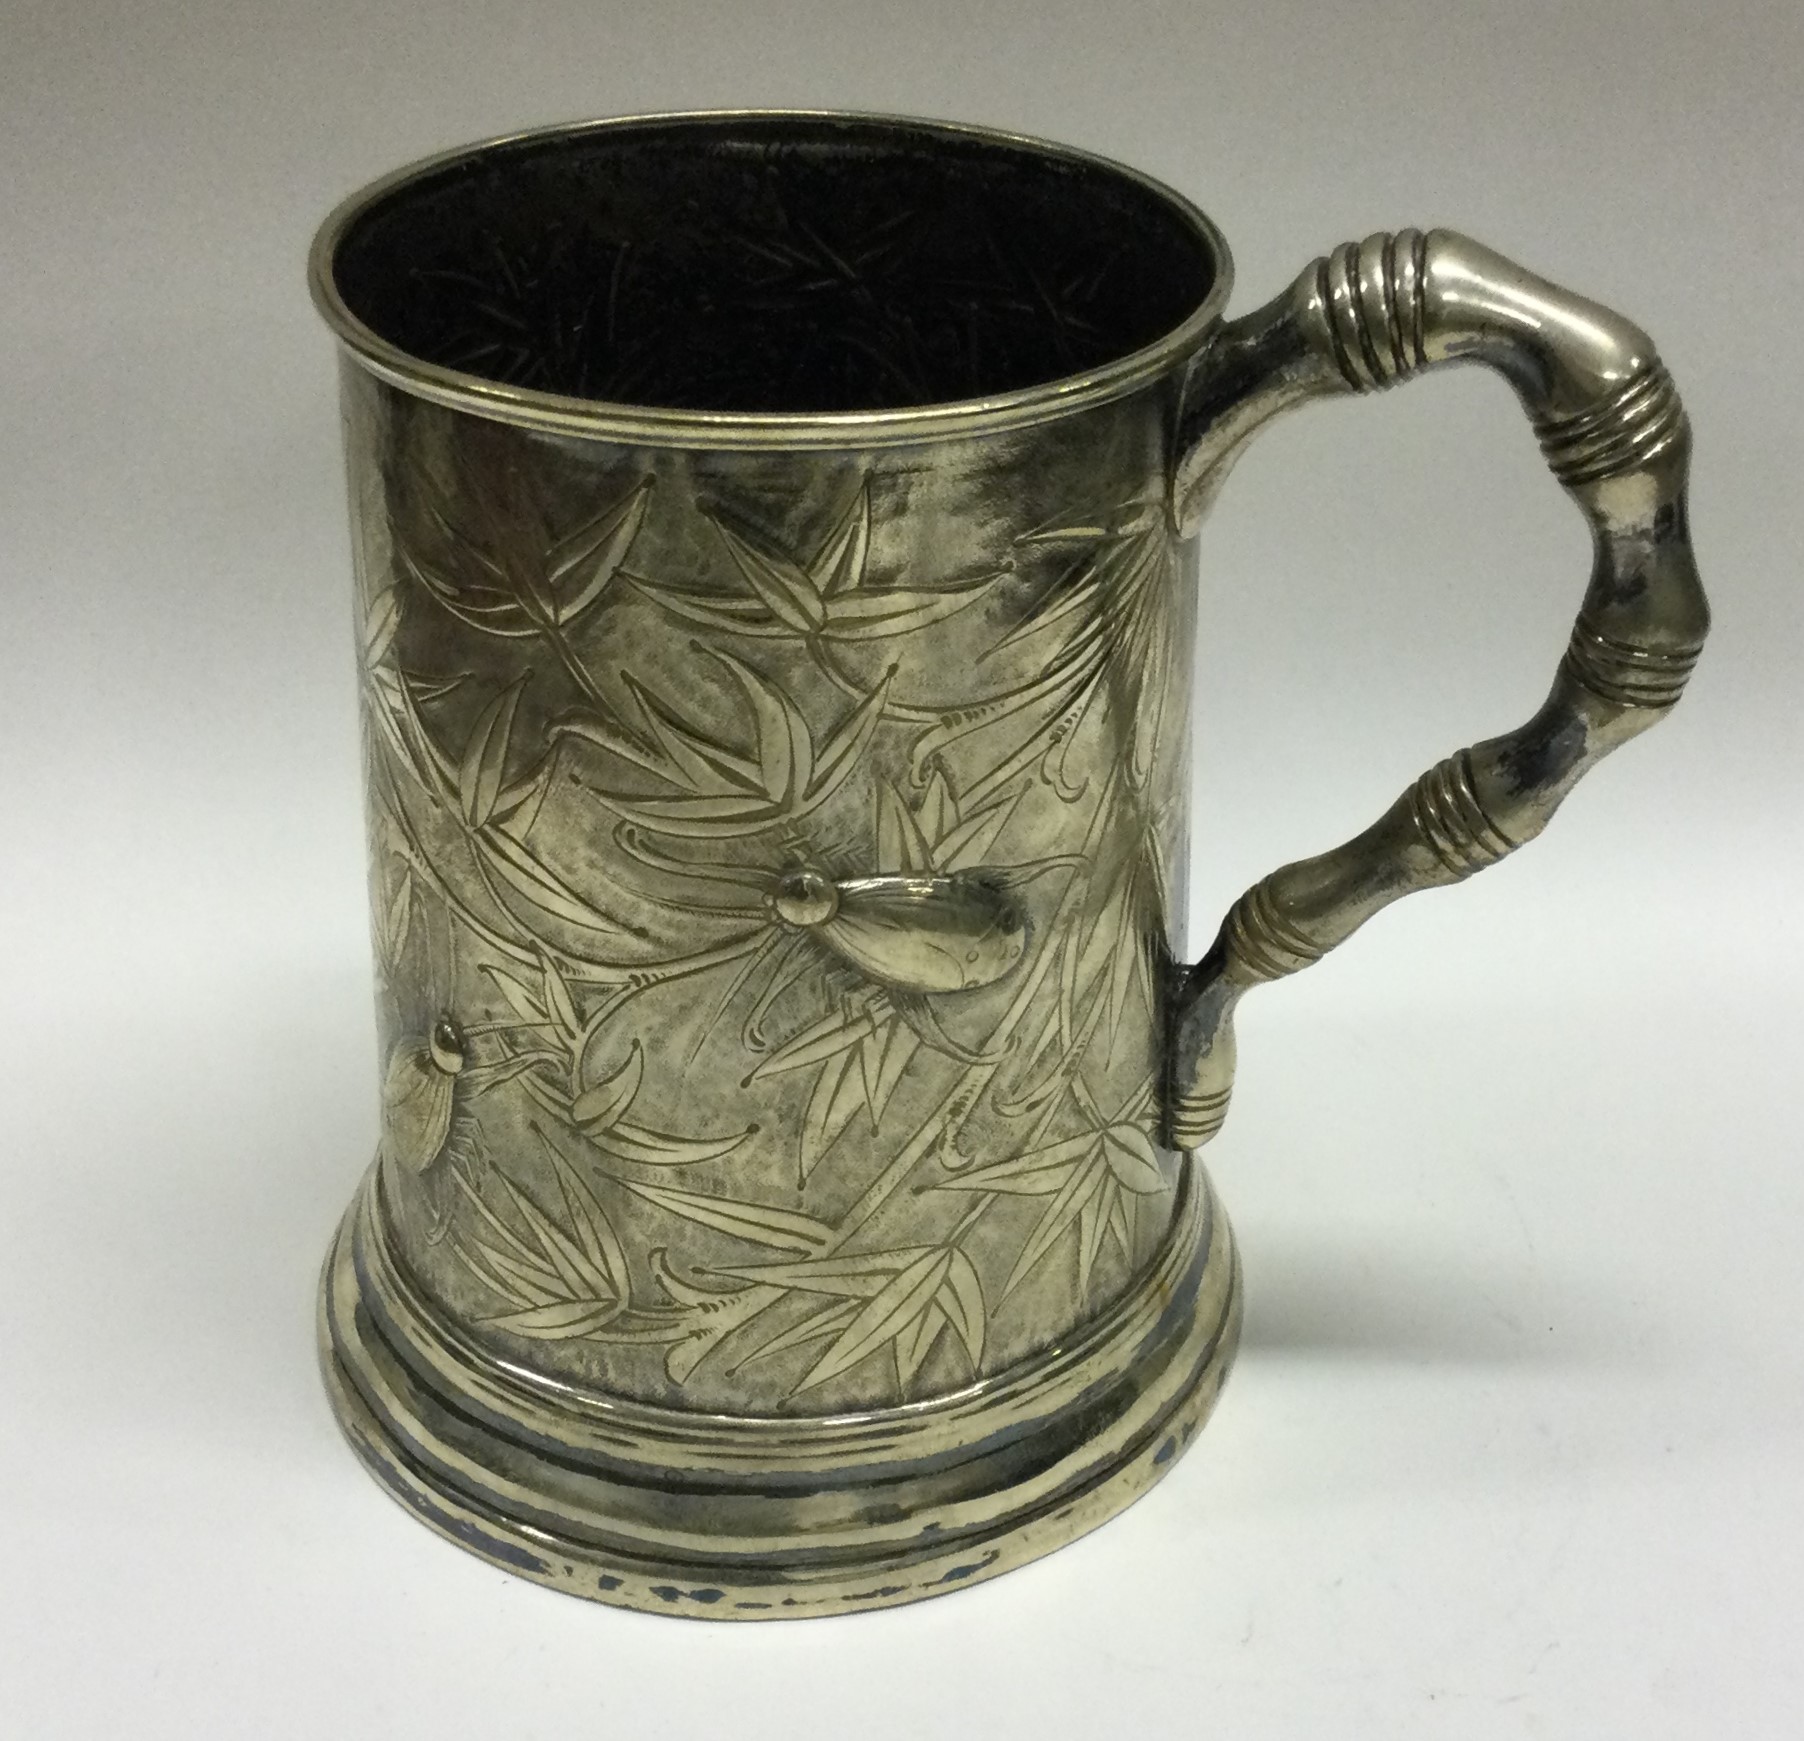 A heavy Chinese silver plated mug embossed with beetles. - Image 2 of 2